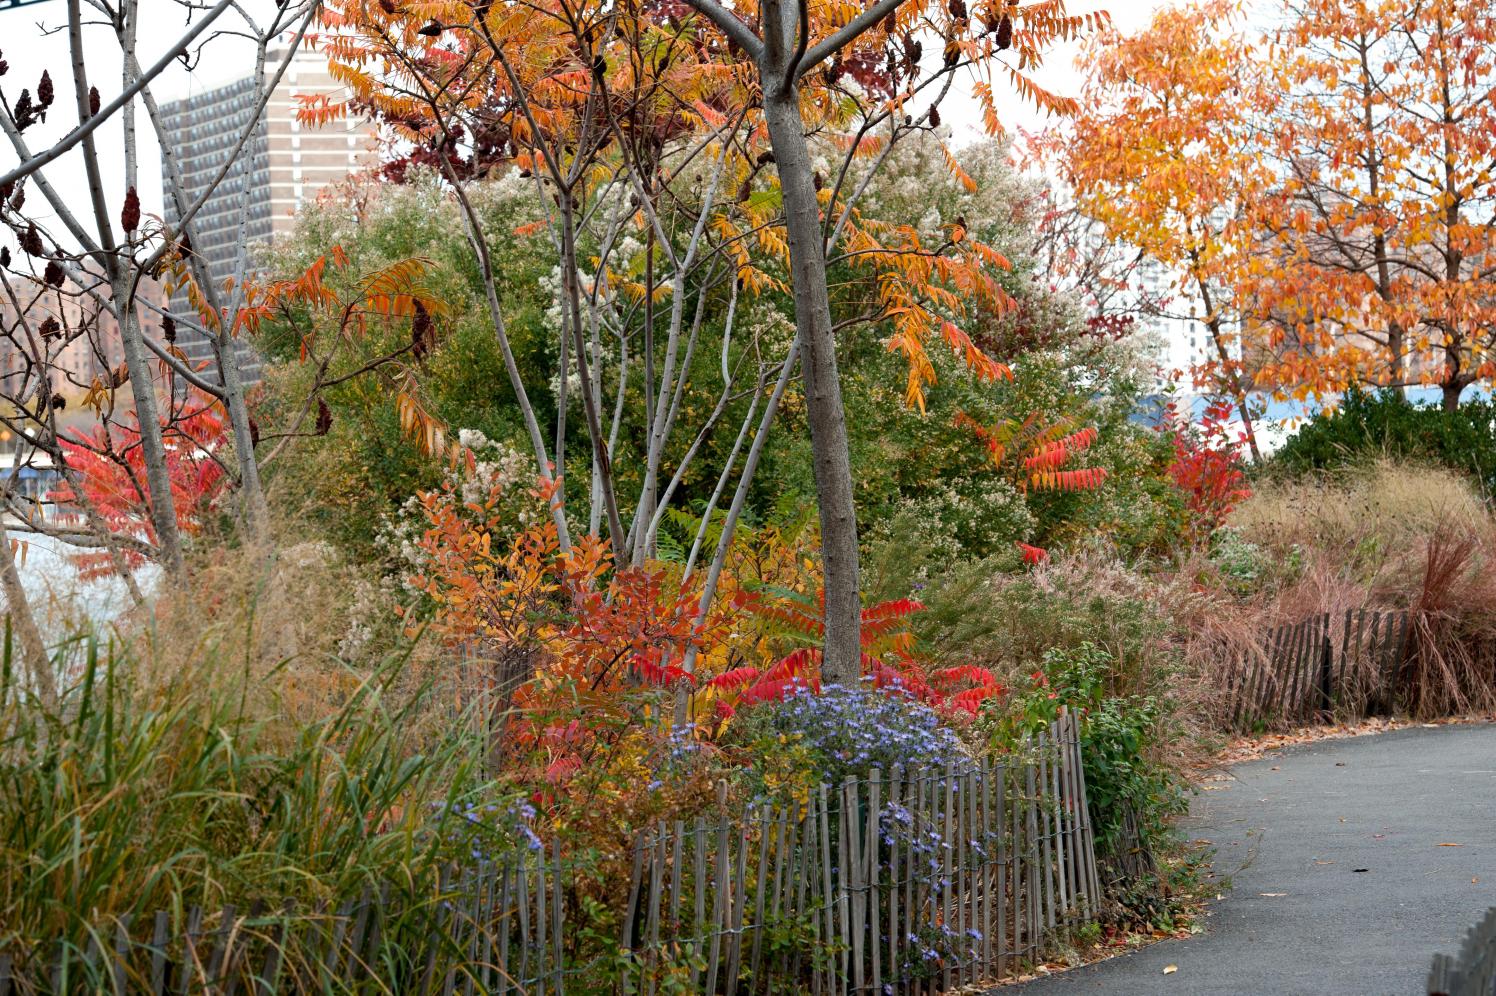 Trees with fall leaves next to a pathway with flowers.